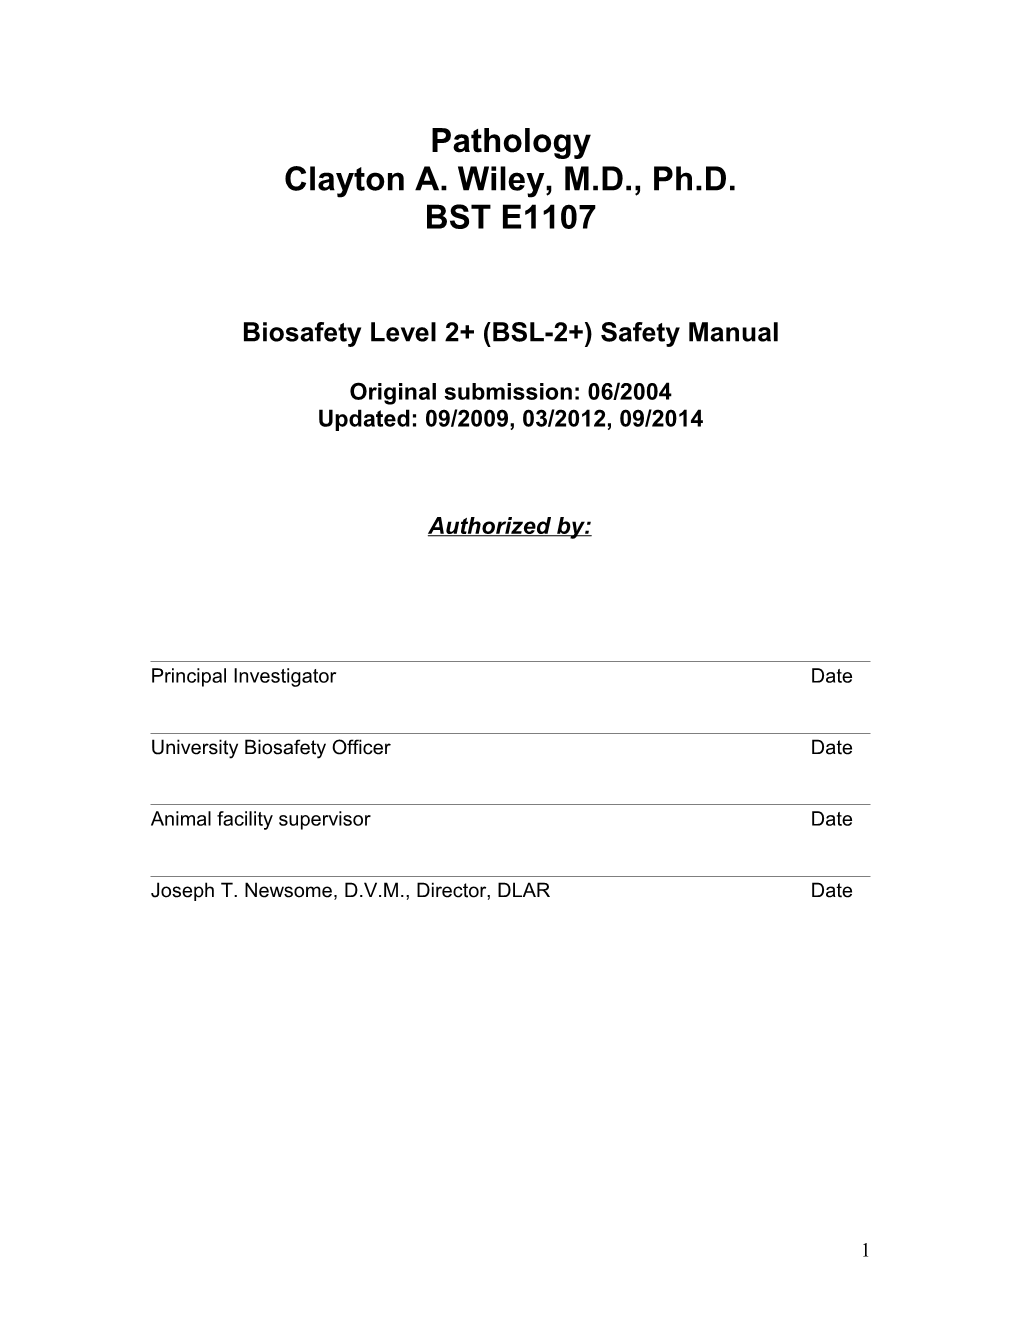 This Is a Sample Biosafety Level 2+ Manual